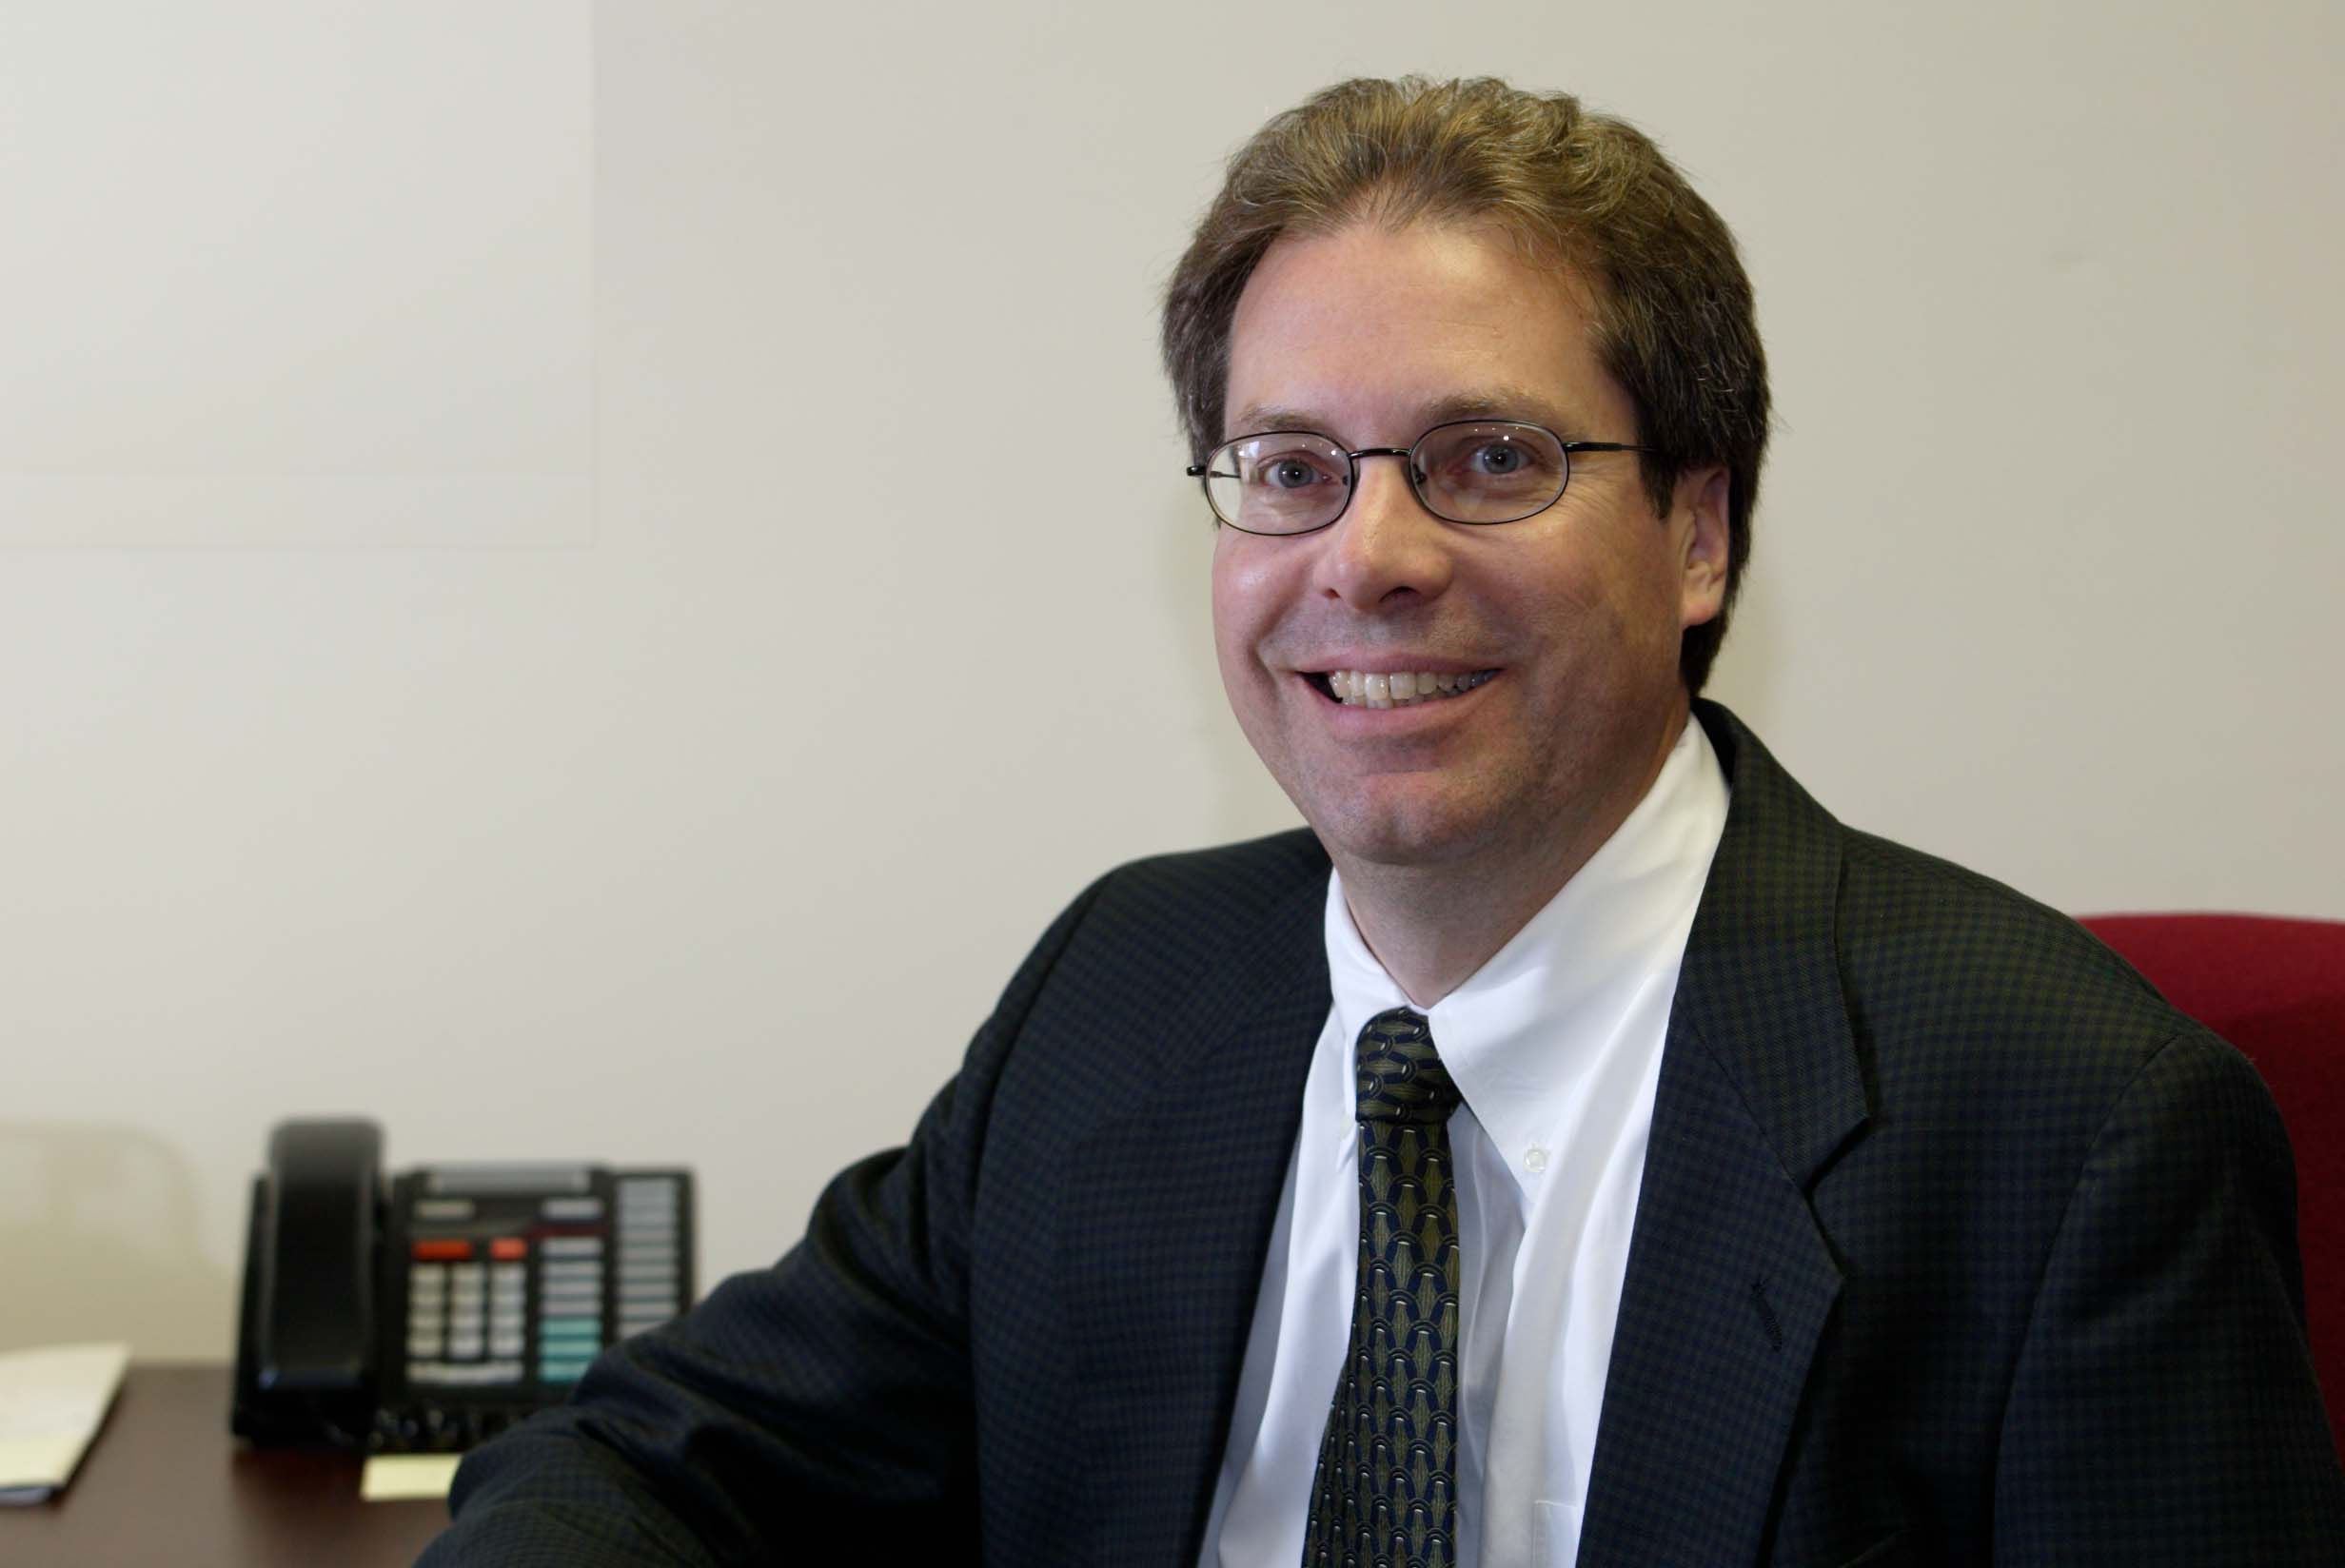 A man with short brown hair, glasses, and wearing a suit smiles and gazes just off from the camera.